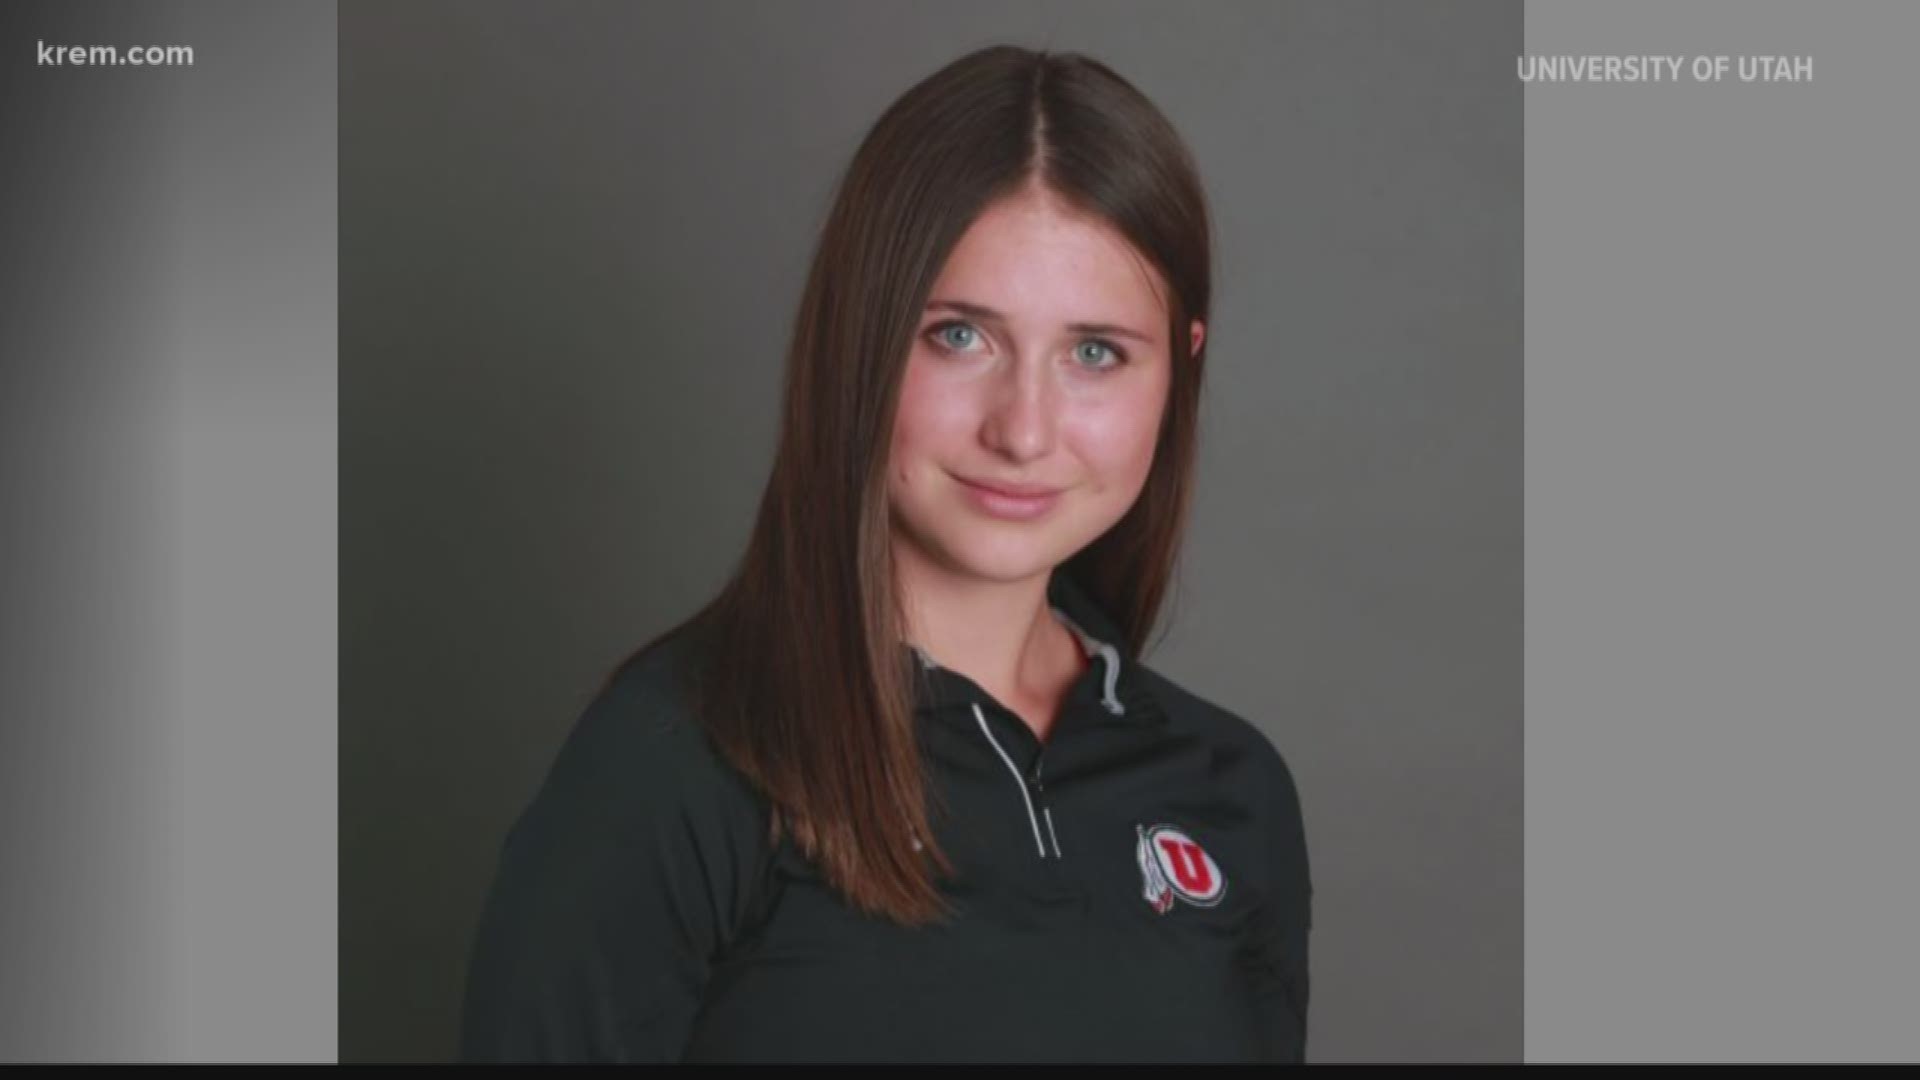 University of Utah officials have identified a female student fatally shot on campus Monday night as a senior track athlete and communication major from Pullman, Washington.